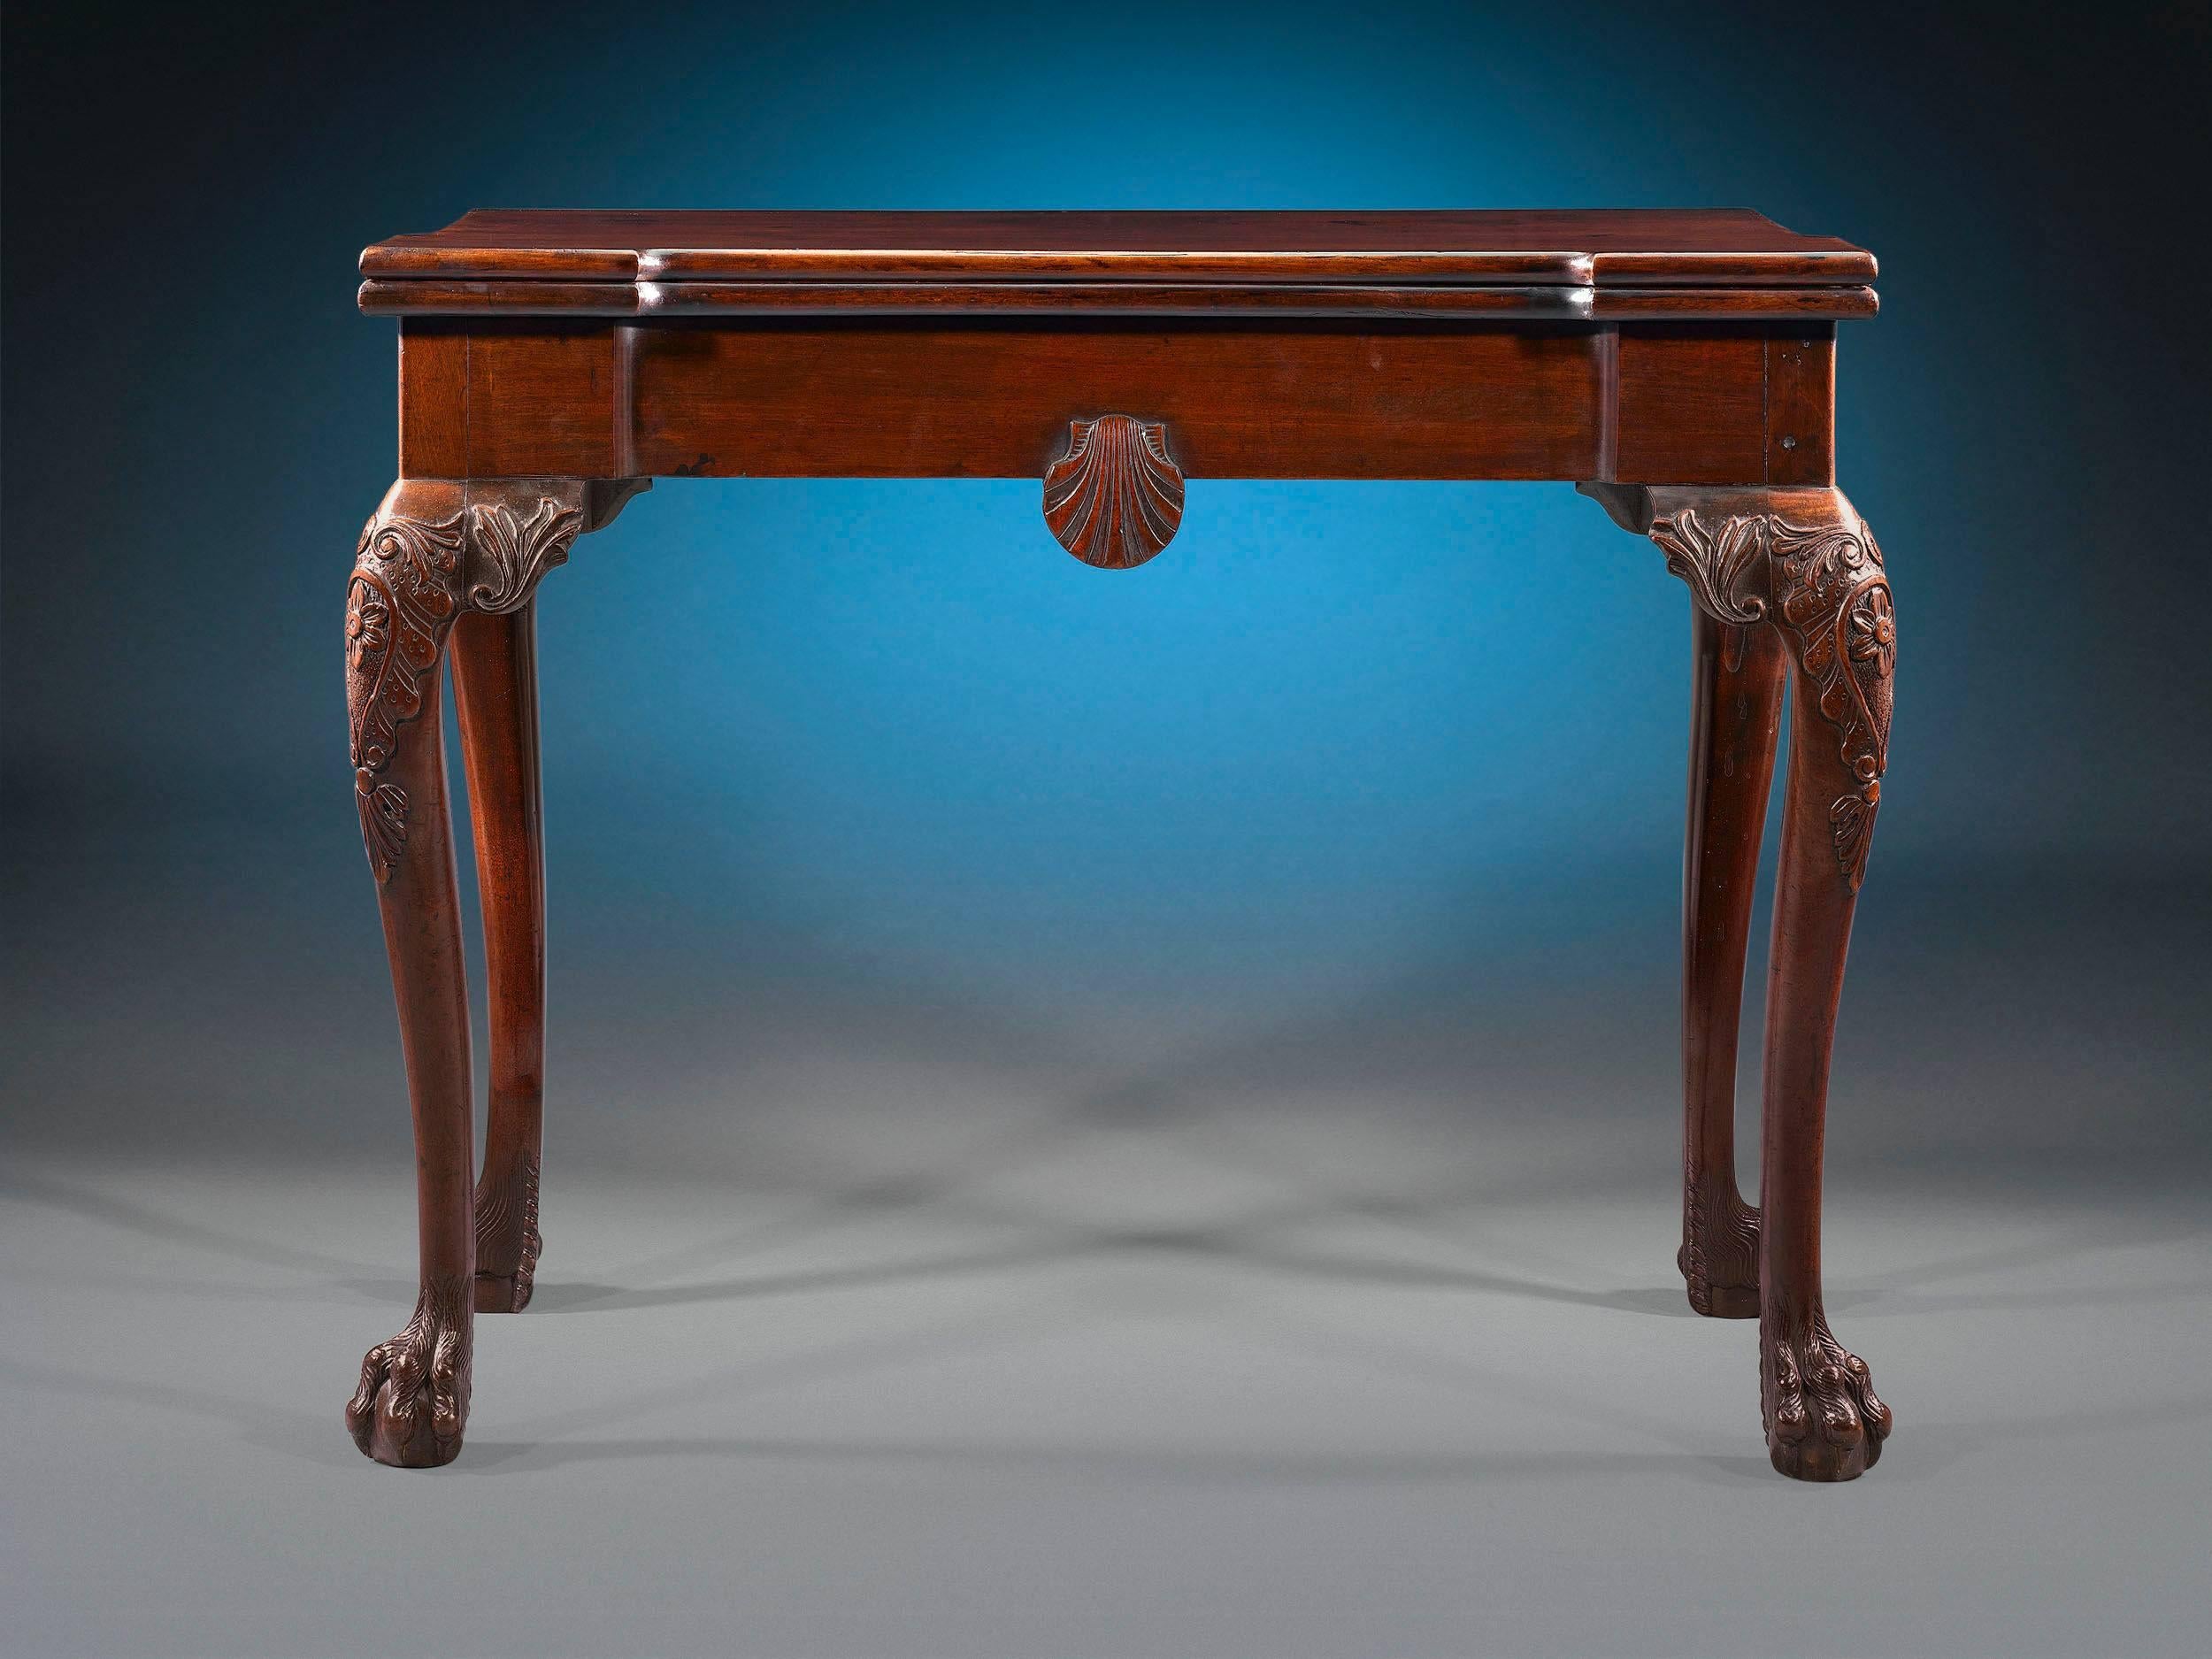 This exceptional Irish games table is as functional as it is beautiful. Crafted of Cuban mahogany, it serves as a console table when not in use, but the top folds out to reveal a green baize playing surface, supported by a gate leg, perfect for